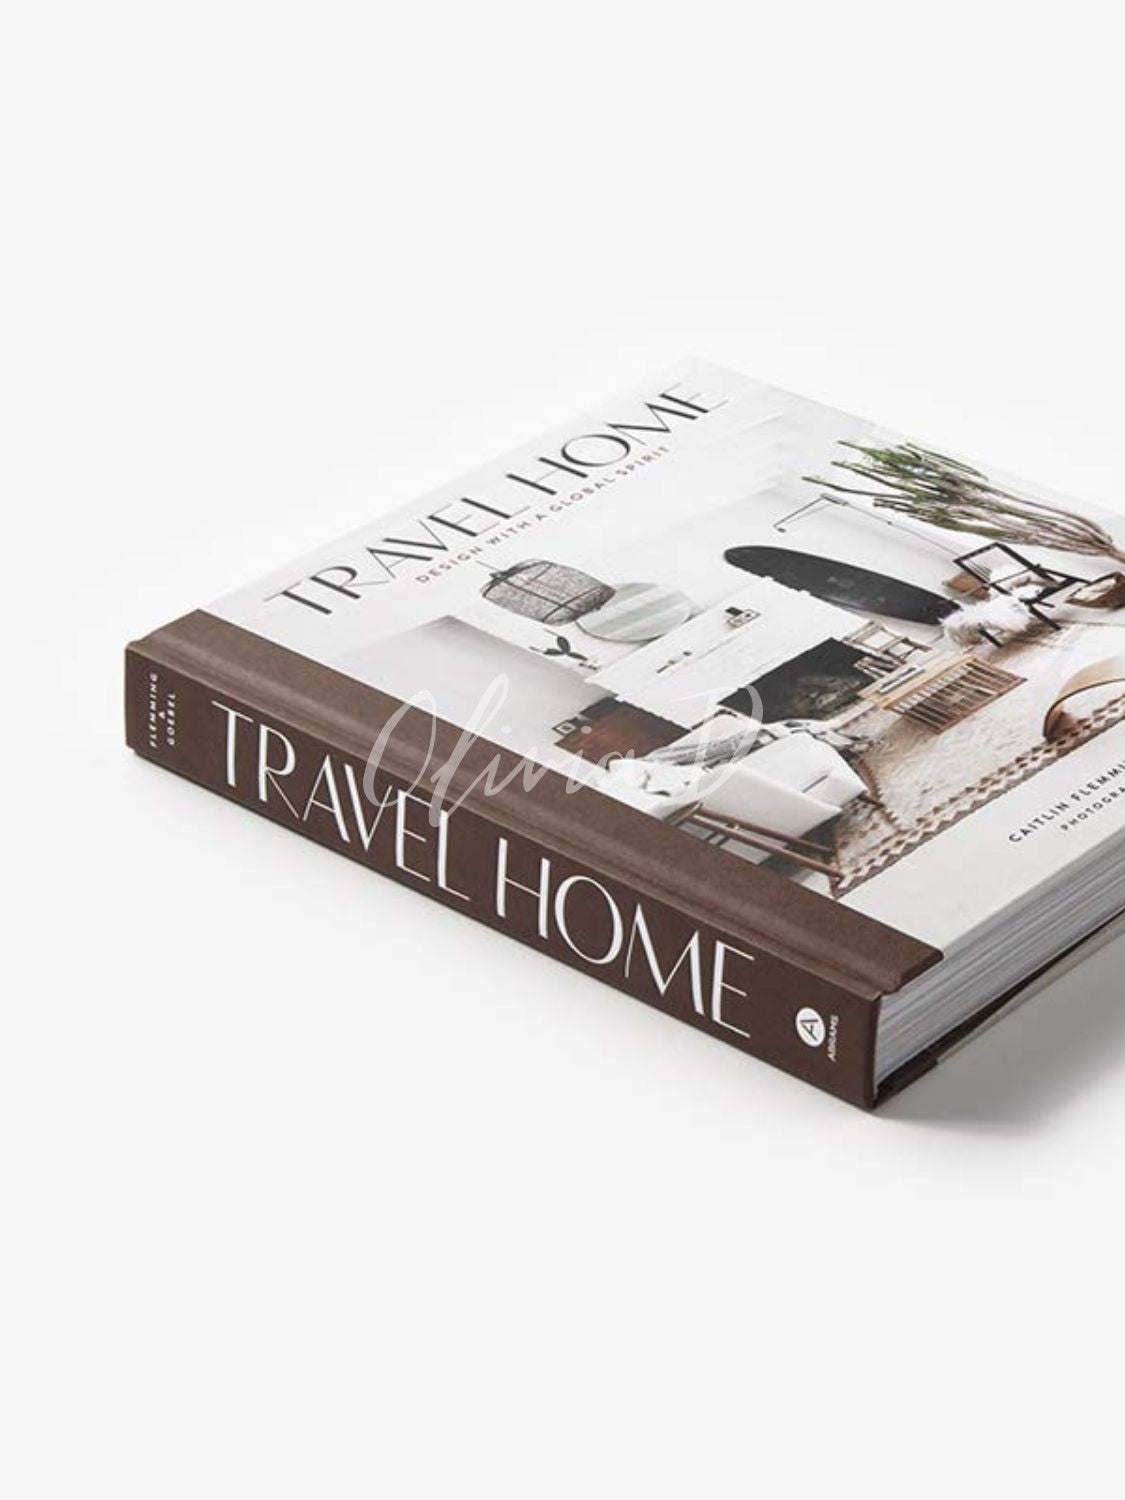 TRAVEL HOME: DESIGN WITH GLOBAL SPIRIT